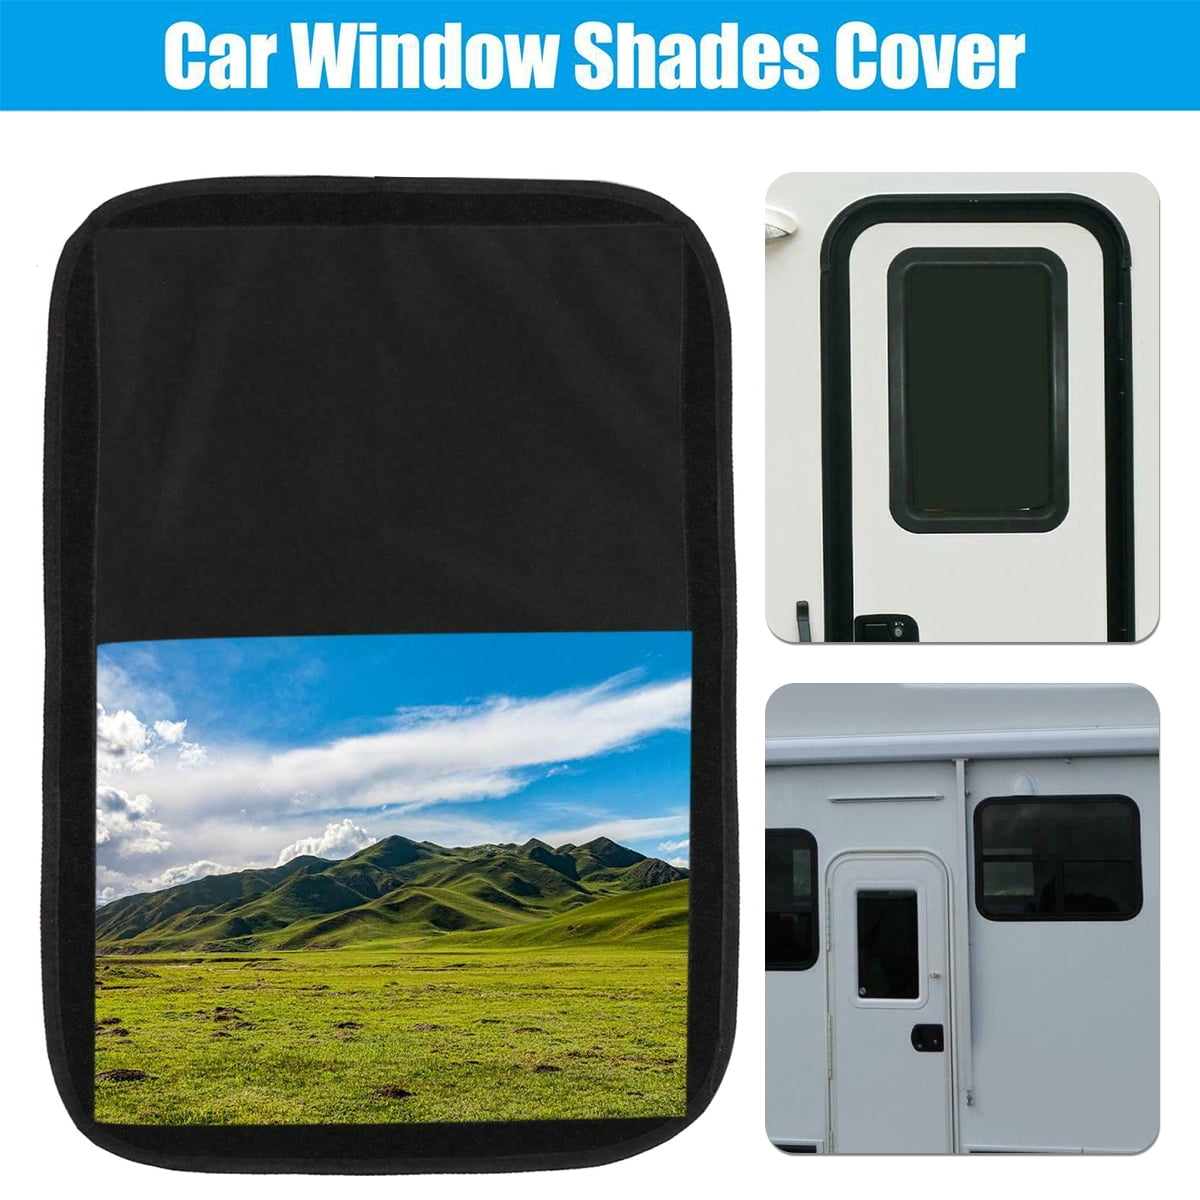 Tzgsonp RV Door Window Shade Cover, Sun Blackout Fabric for Camper